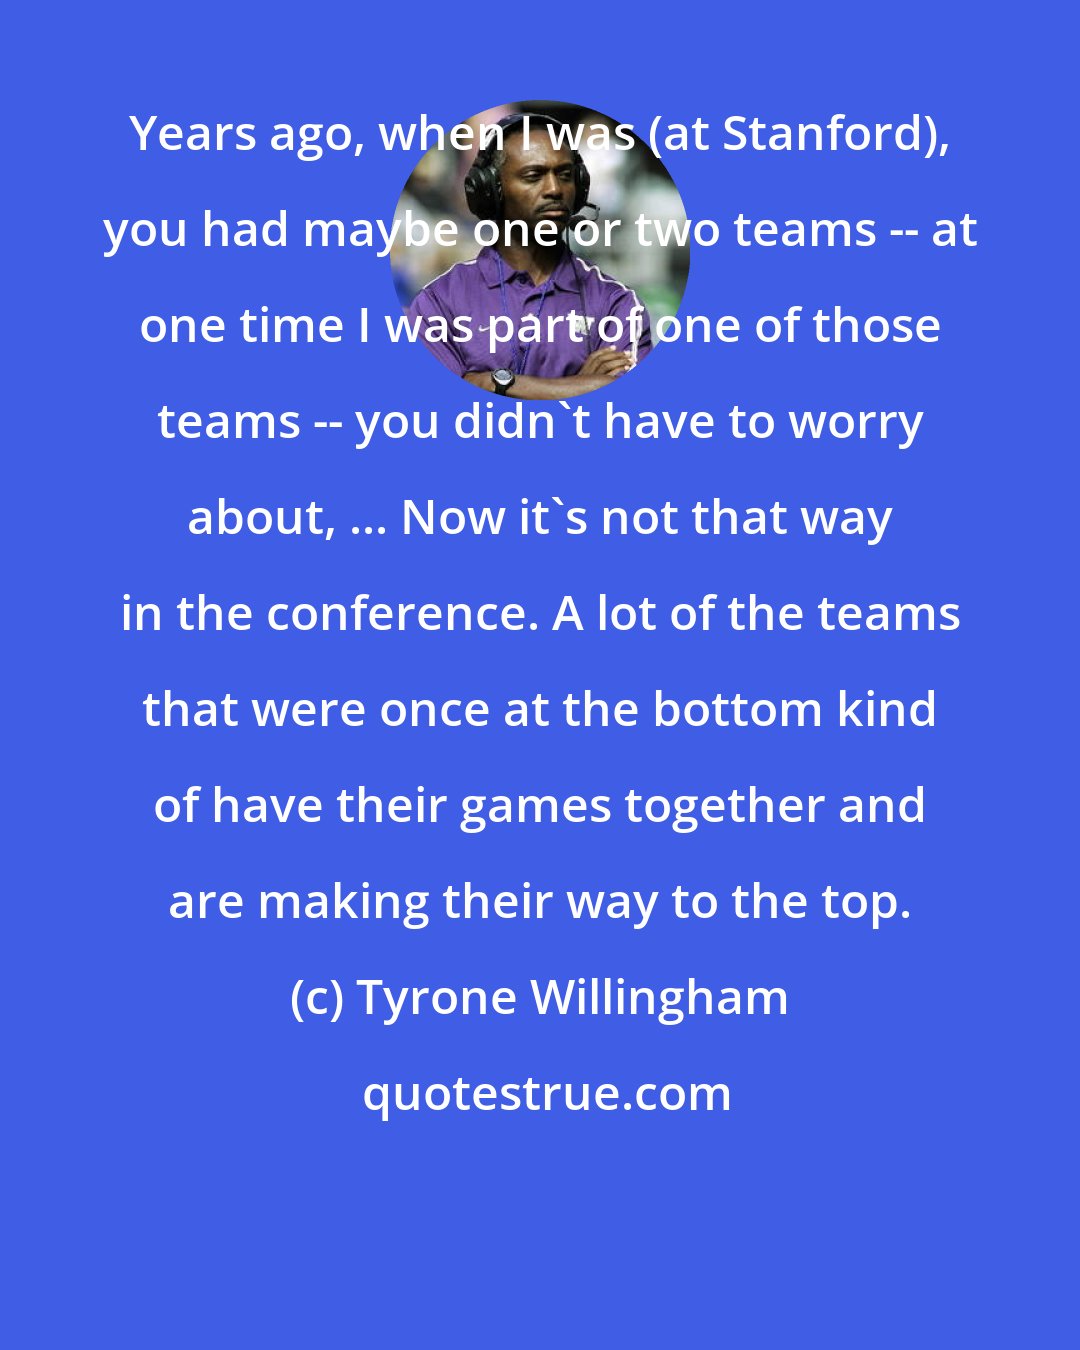 Tyrone Willingham: Years ago, when I was (at Stanford), you had maybe one or two teams -- at one time I was part of one of those teams -- you didn't have to worry about, ... Now it's not that way in the conference. A lot of the teams that were once at the bottom kind of have their games together and are making their way to the top.